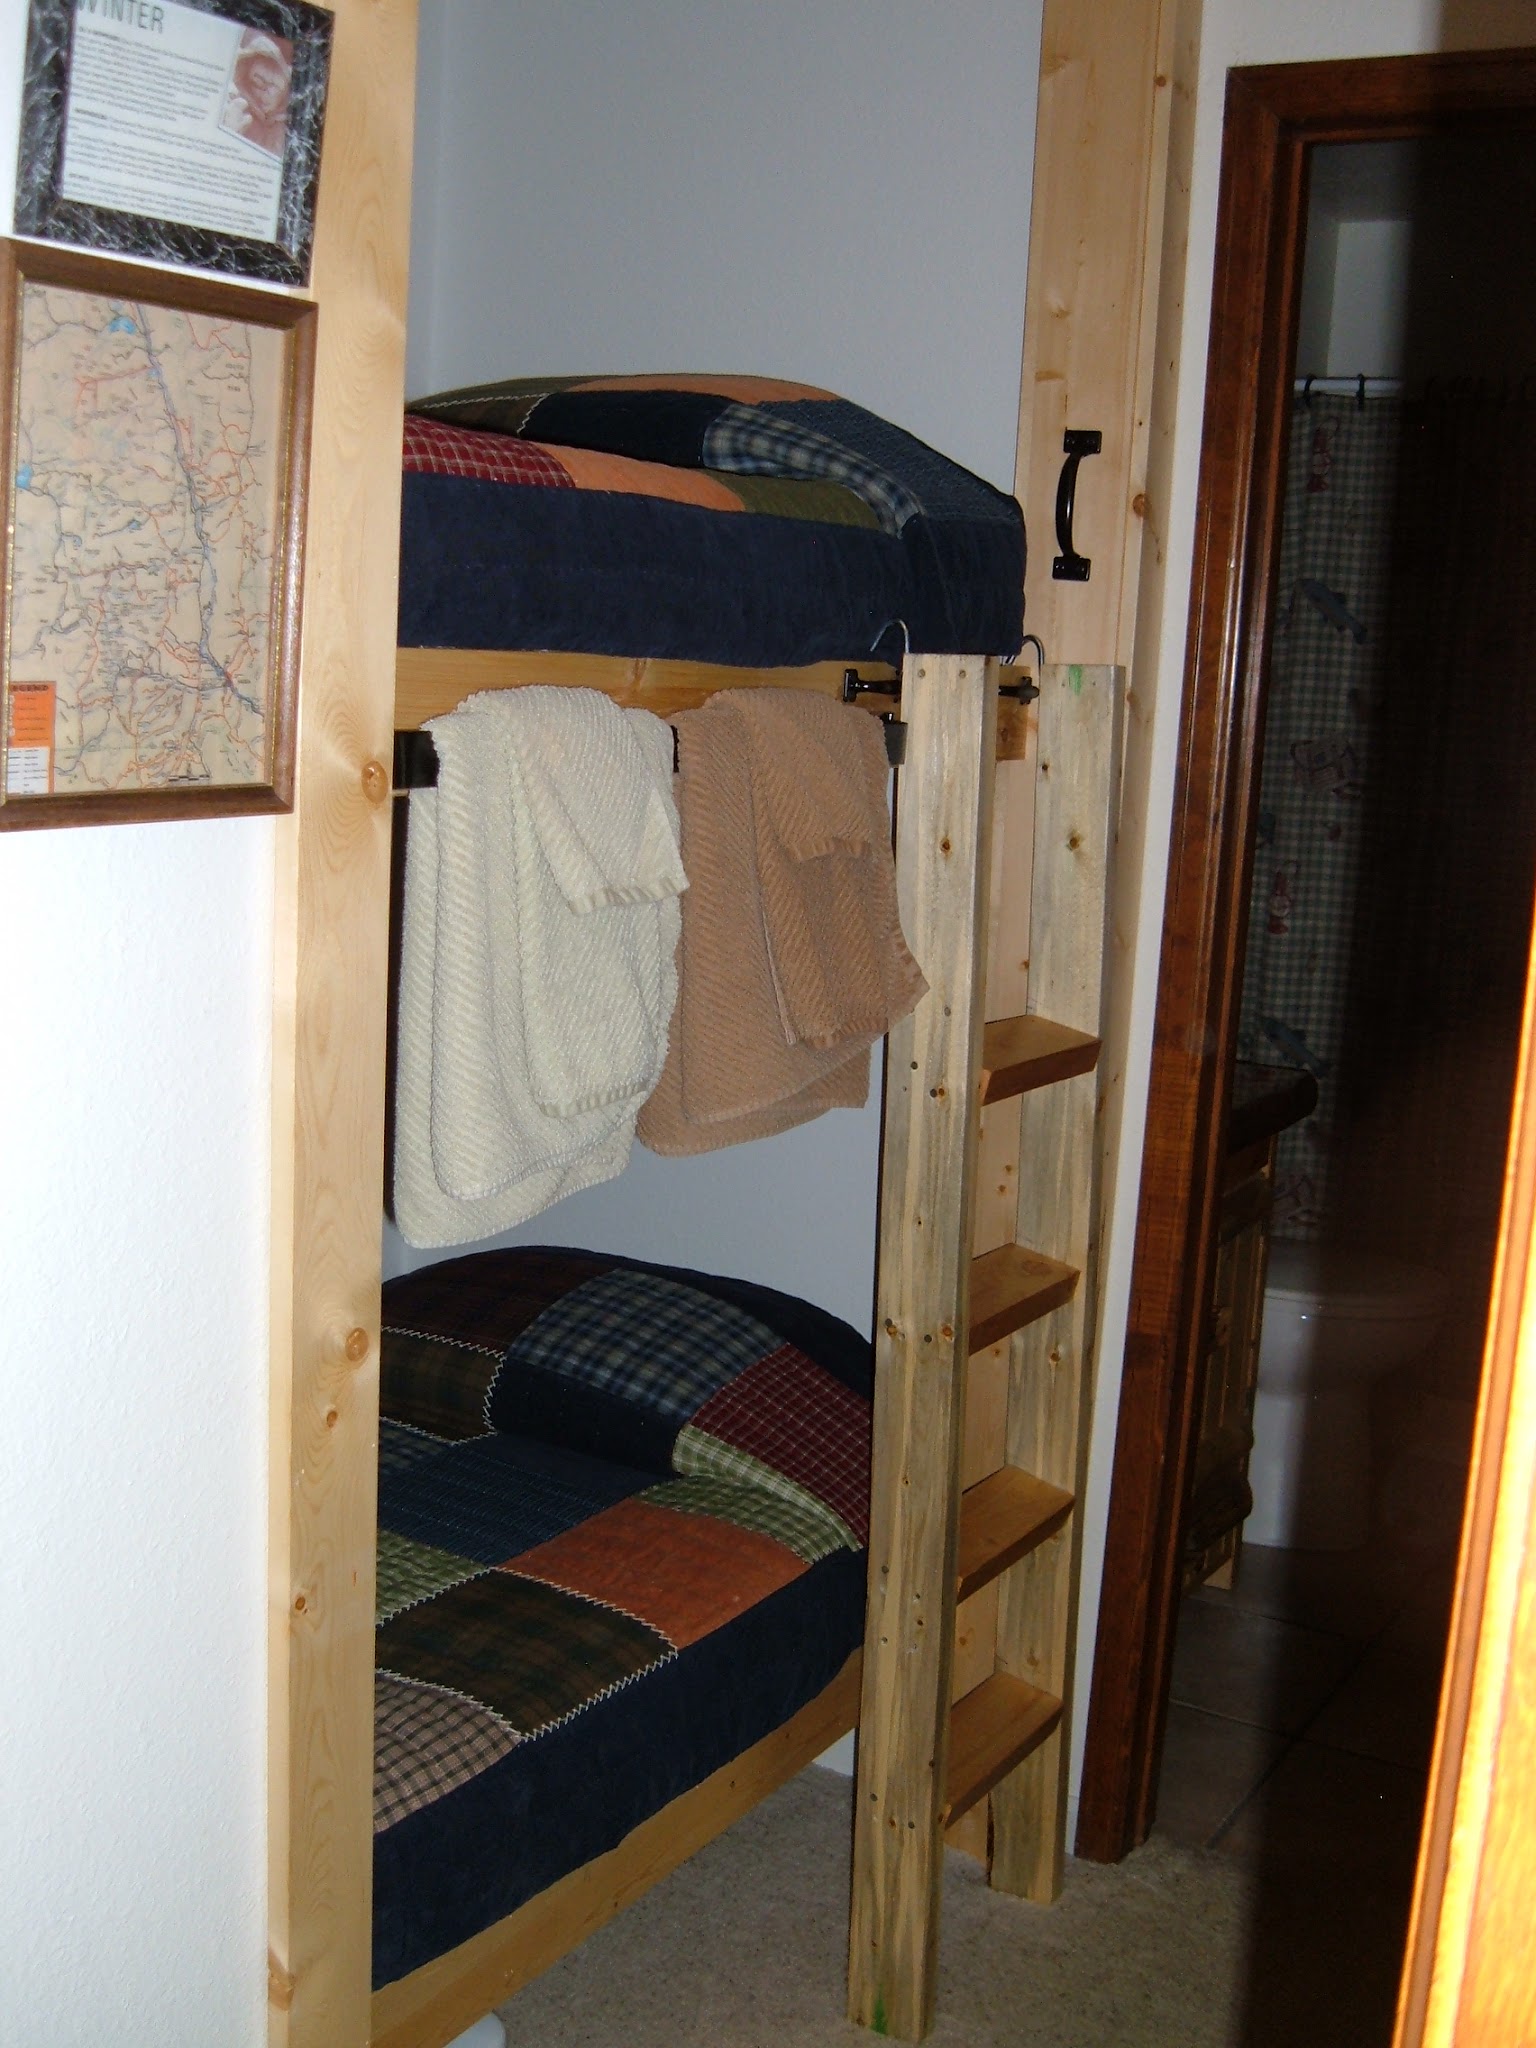 Built in bunk beds in a hallway leading to a bathroom.